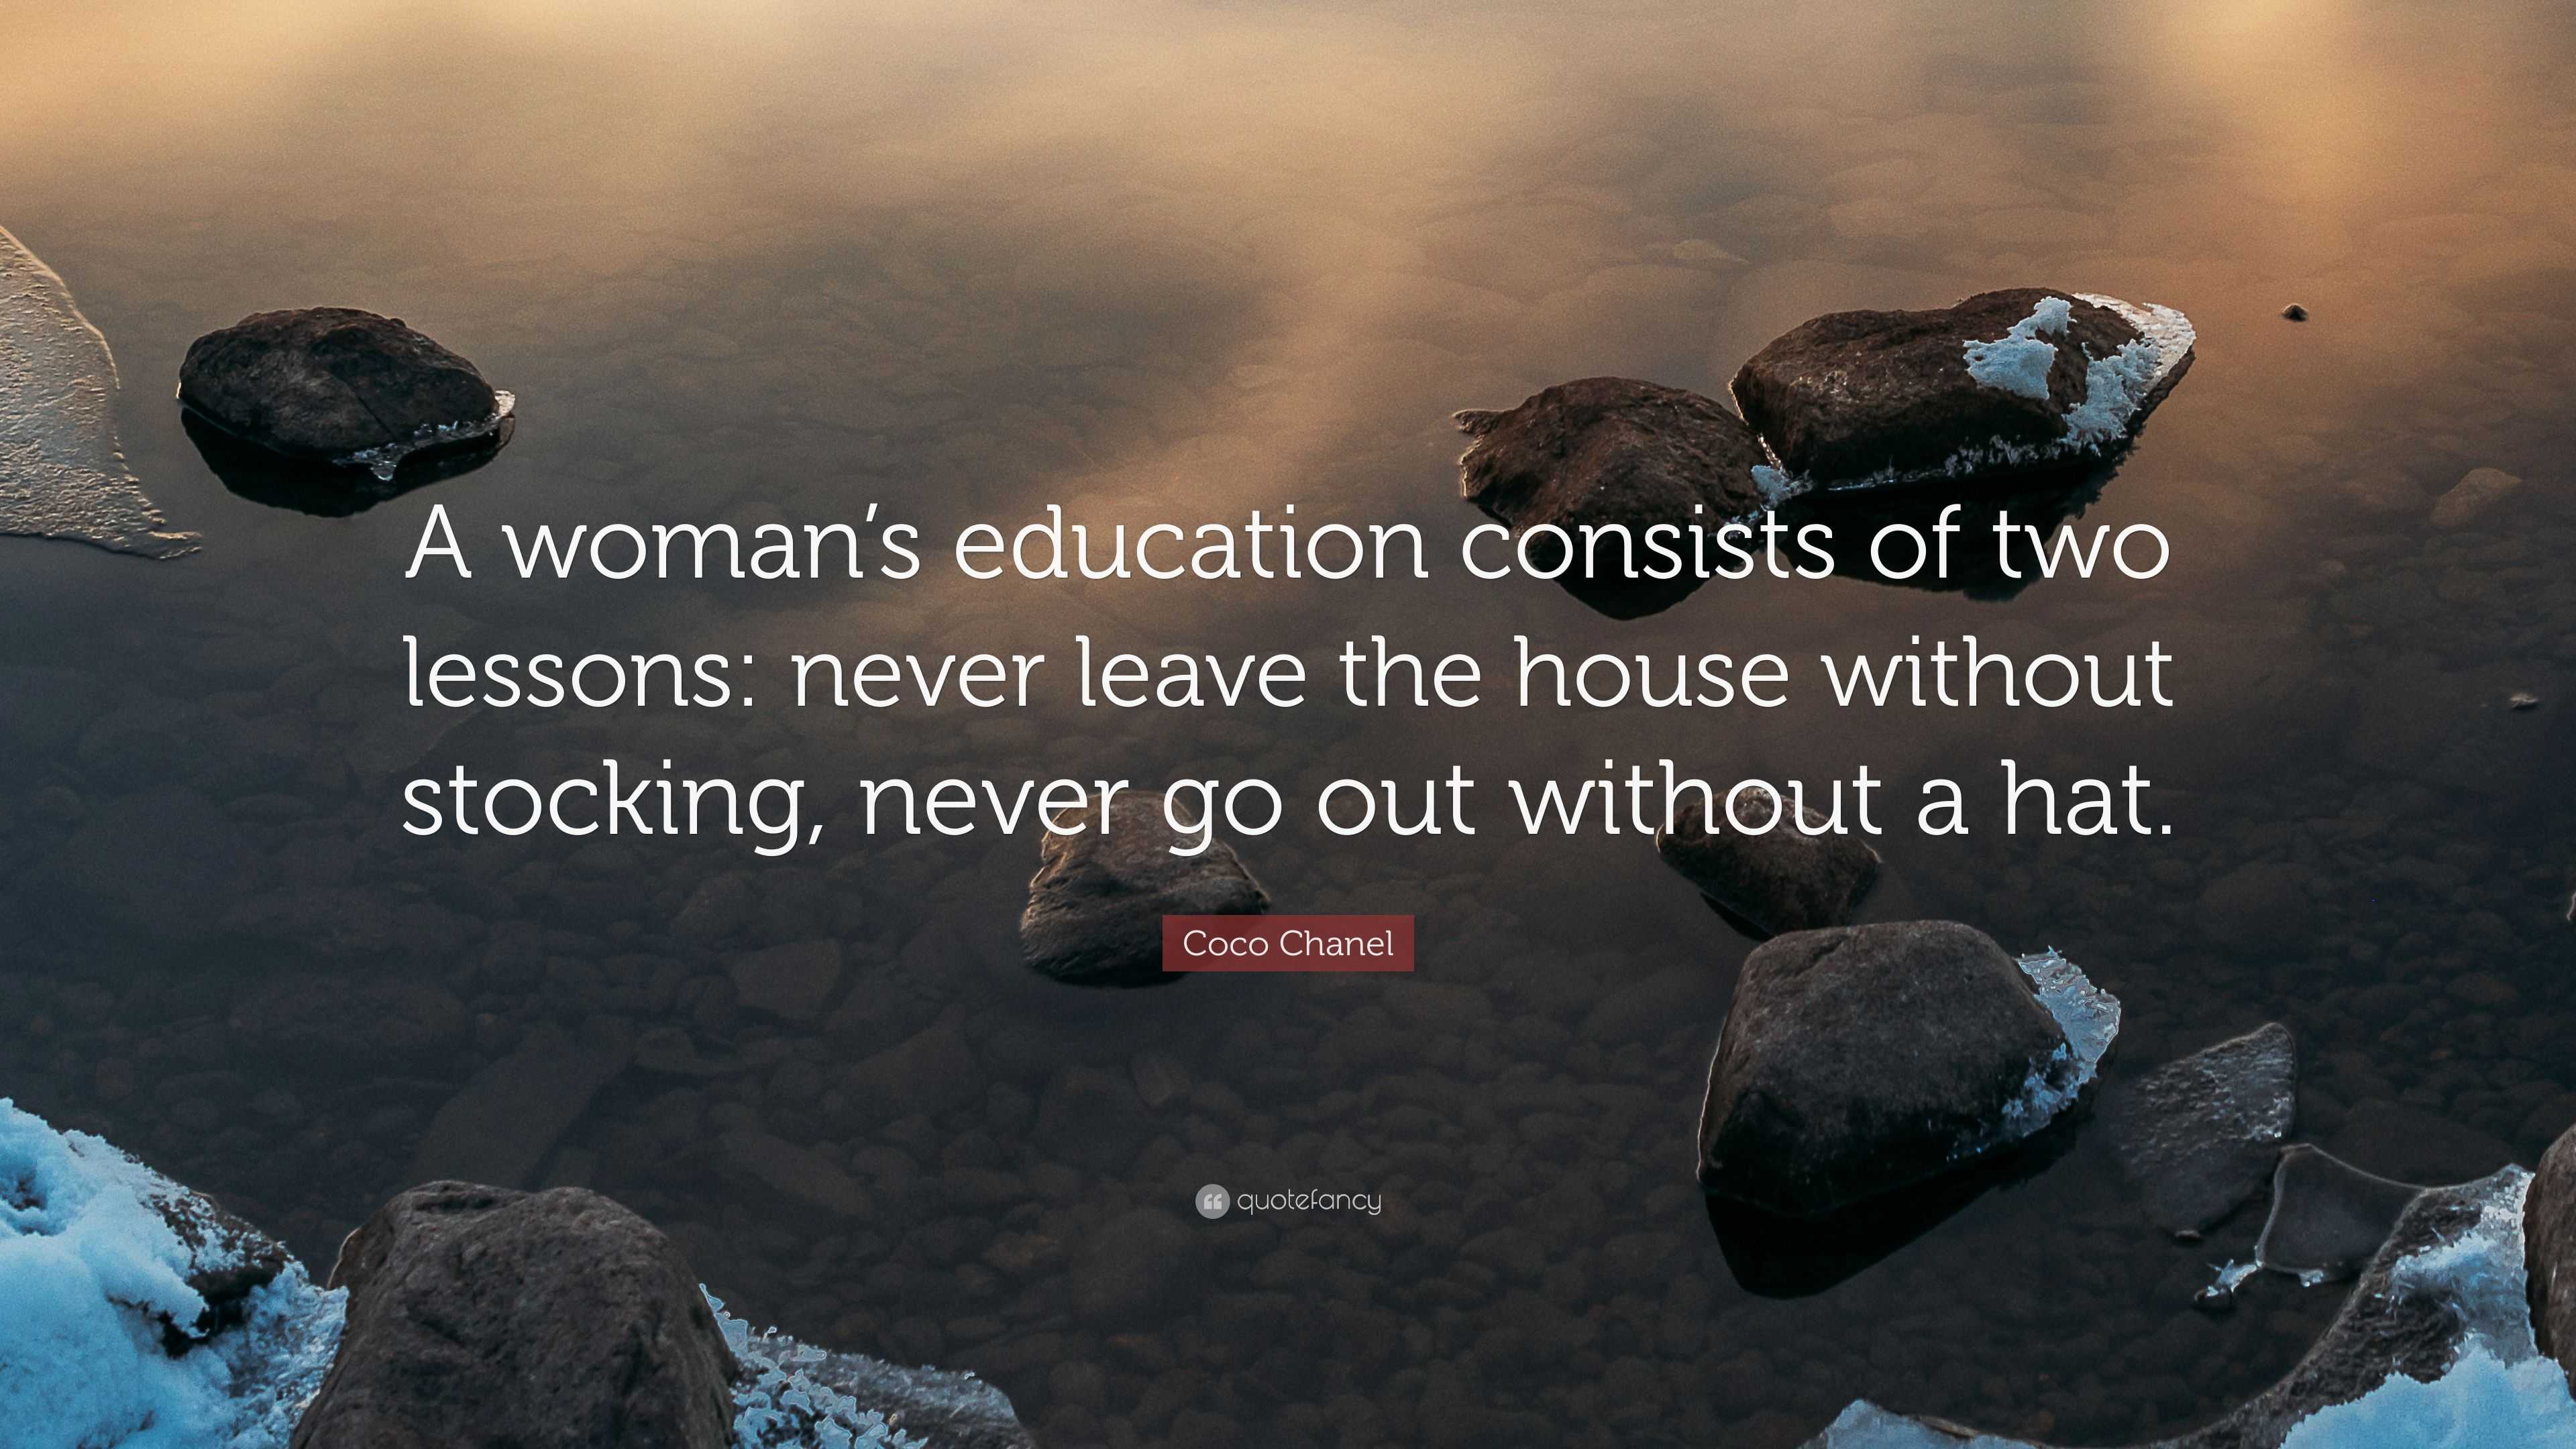 Coco Chanel Quote: “A woman's education consists of two lessons